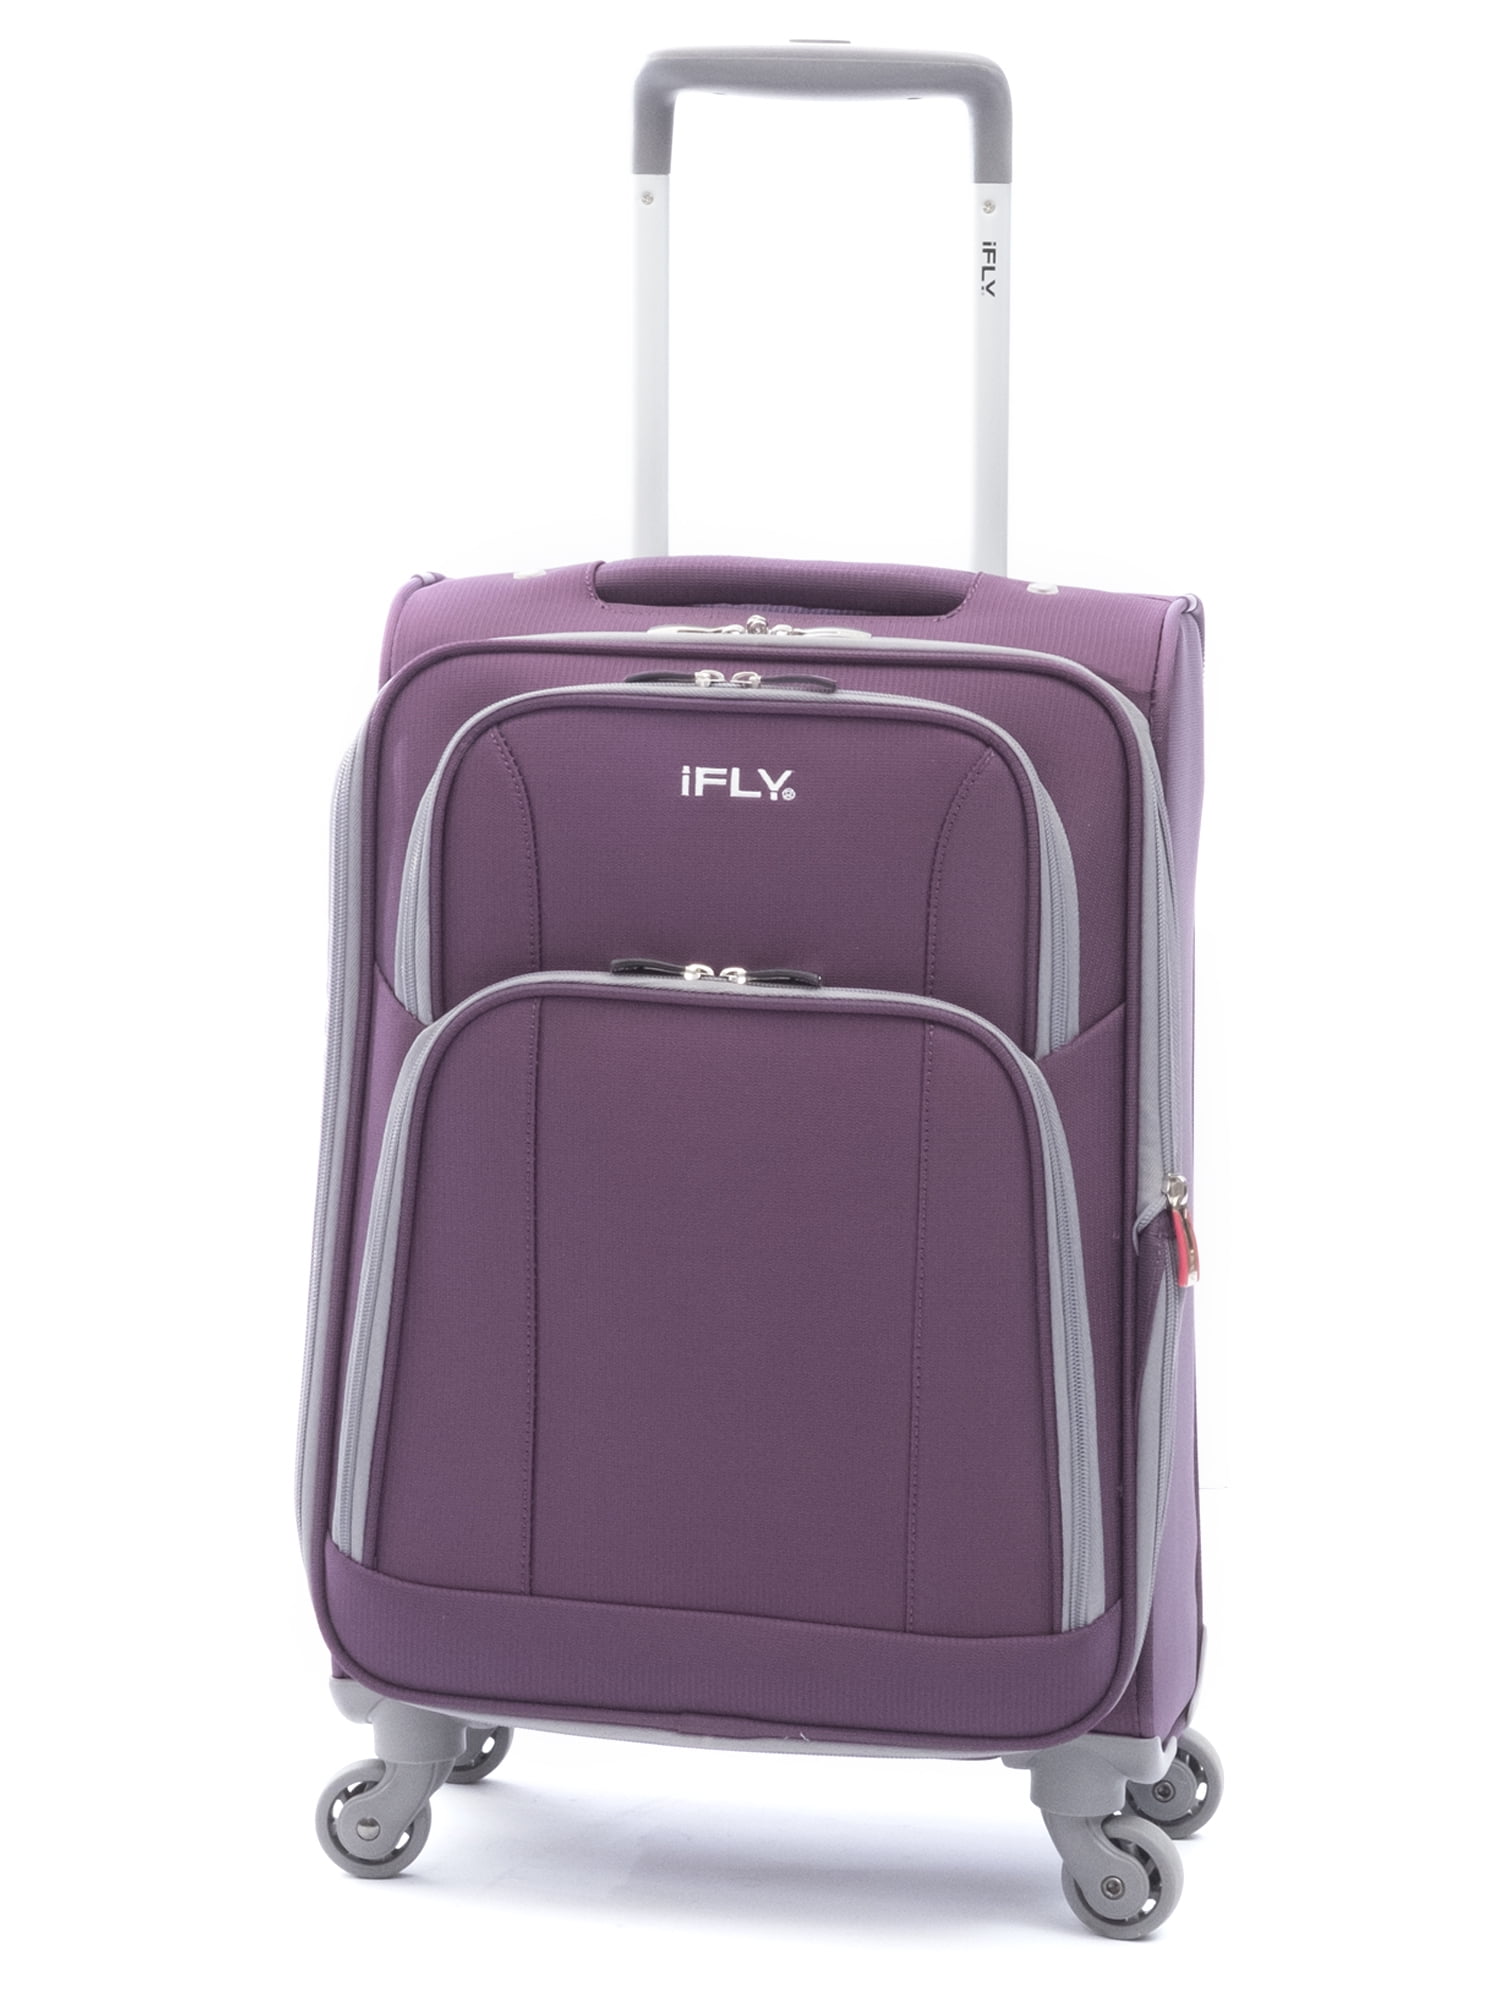 iFLY Softside Luggage Passion 20 Inch Carryon Luggage, Purple